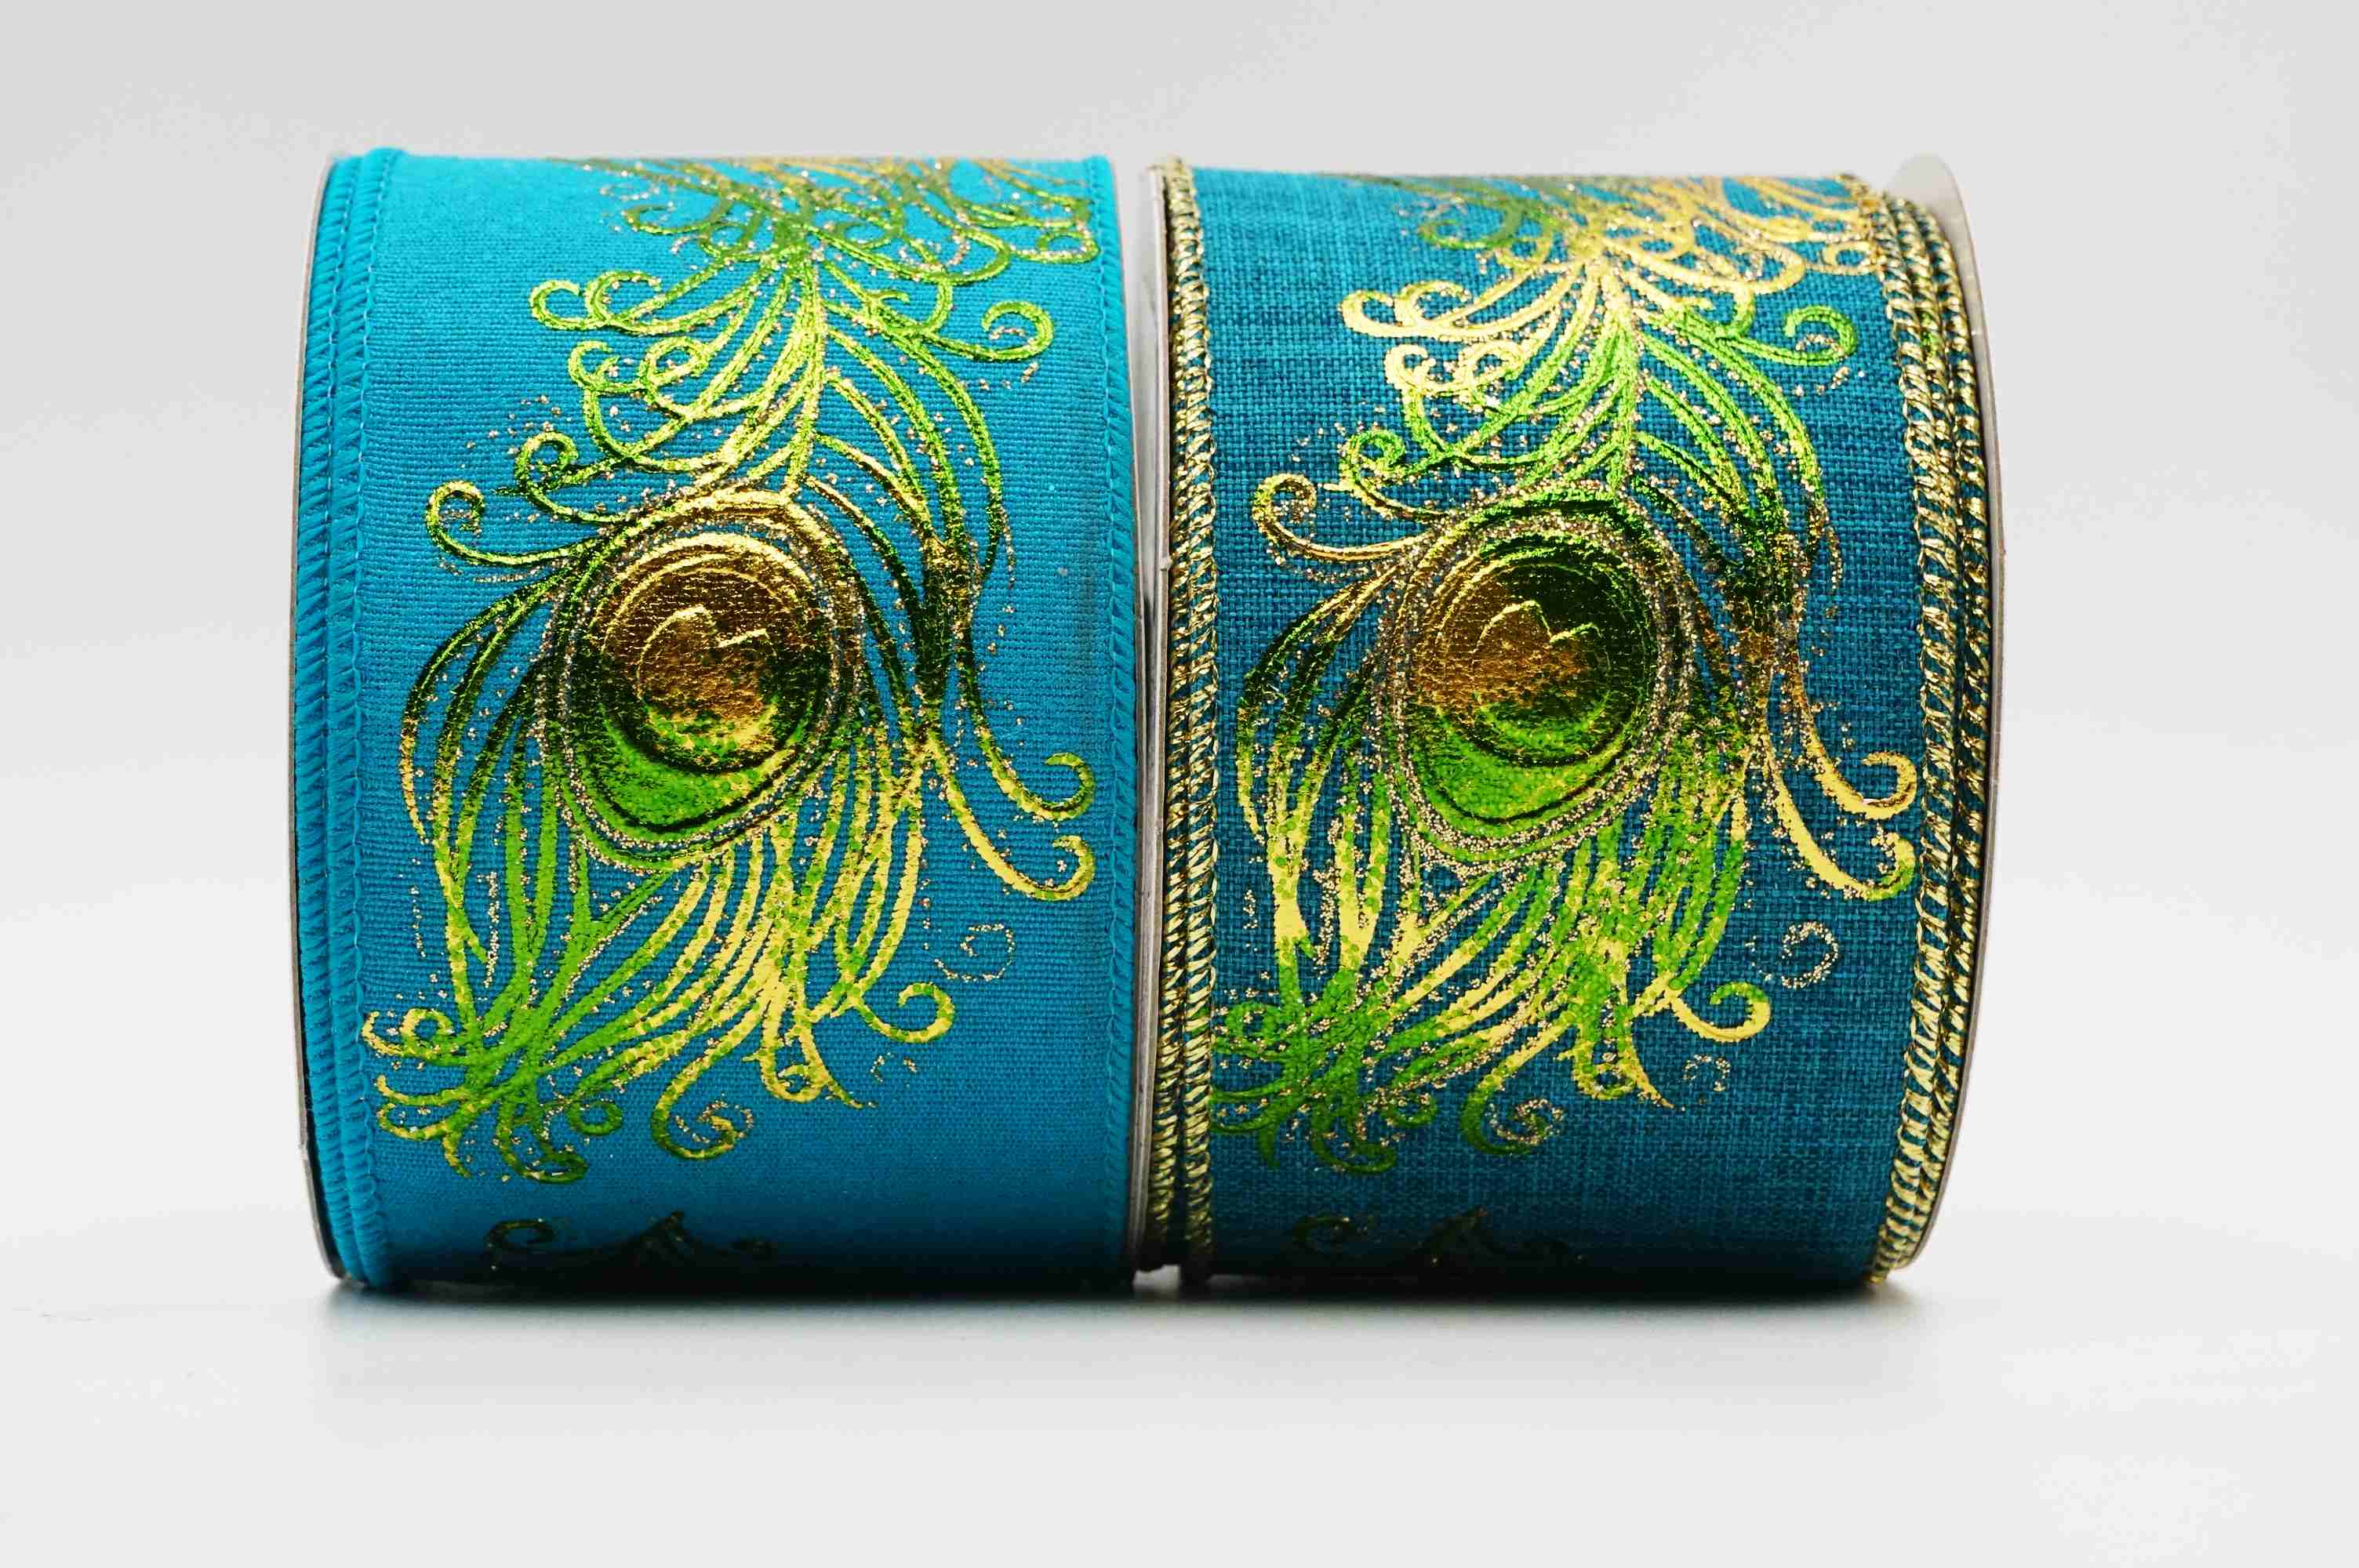 Peacock Diamond Dust Ribbon 1.5” x 10 Yards, Farrrisilk Luxury Ribbon for  Wreaths, Crafts or Floral Designs RP283-77